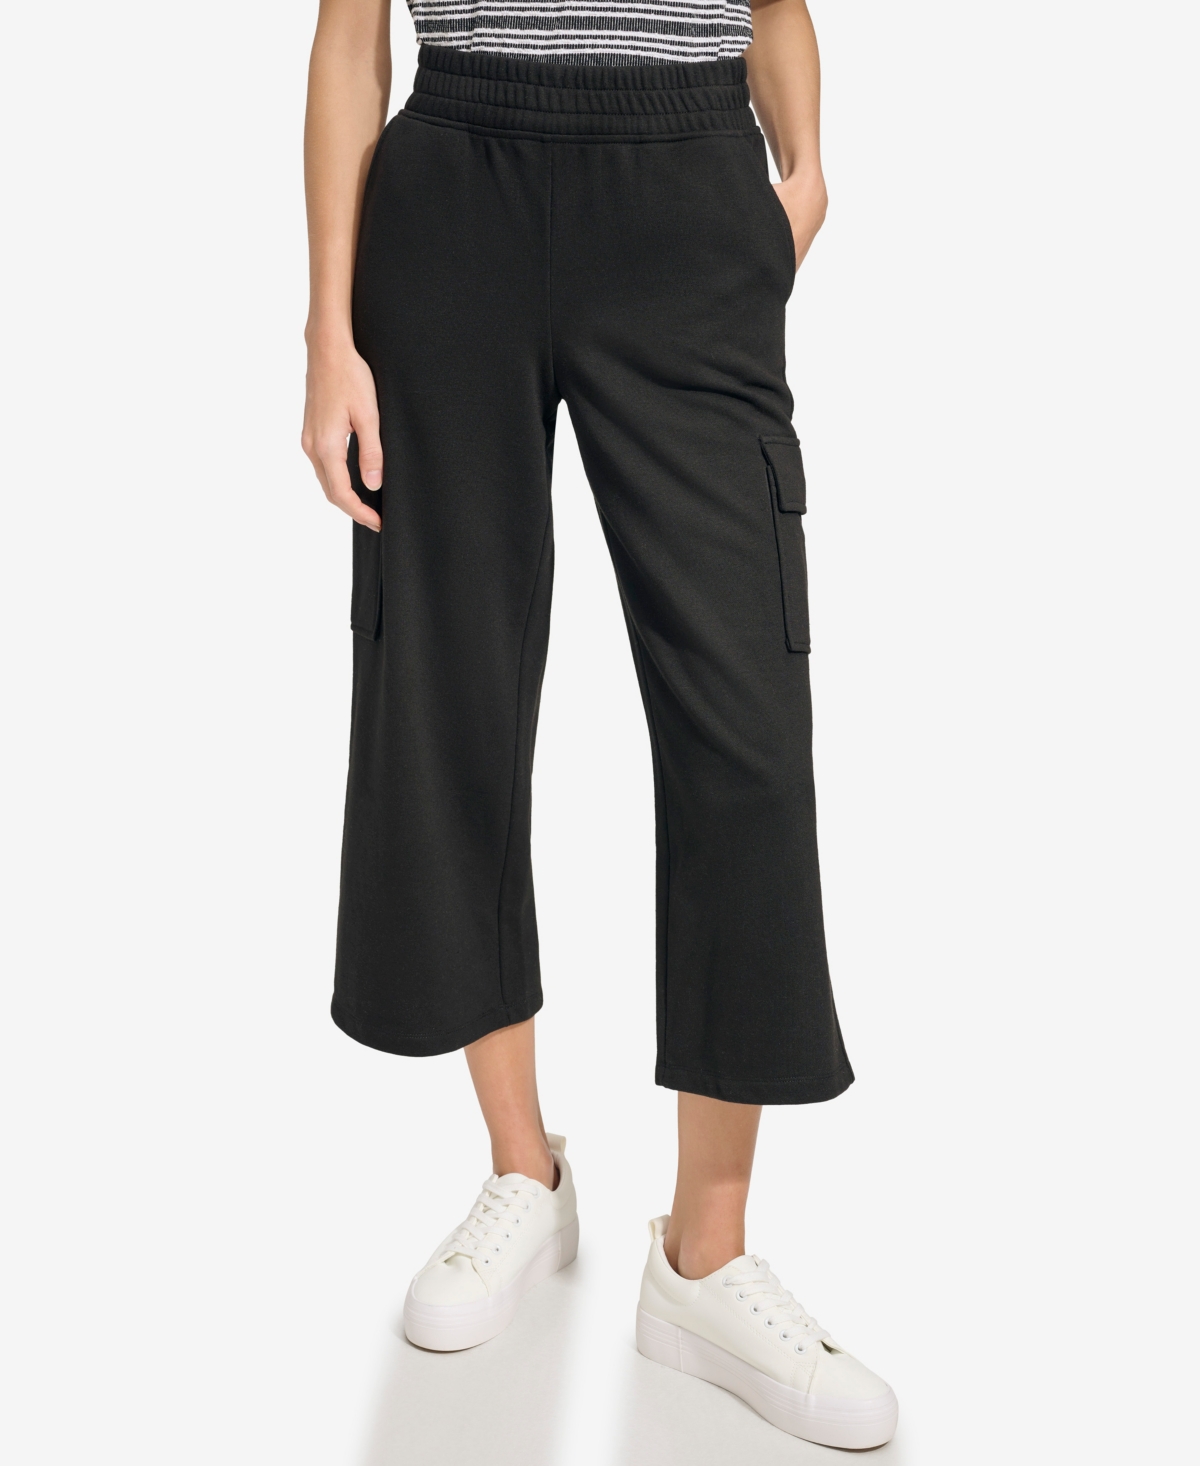 Andrew Marc Sport Women's French Terry Cropped Cargo Pants - Black